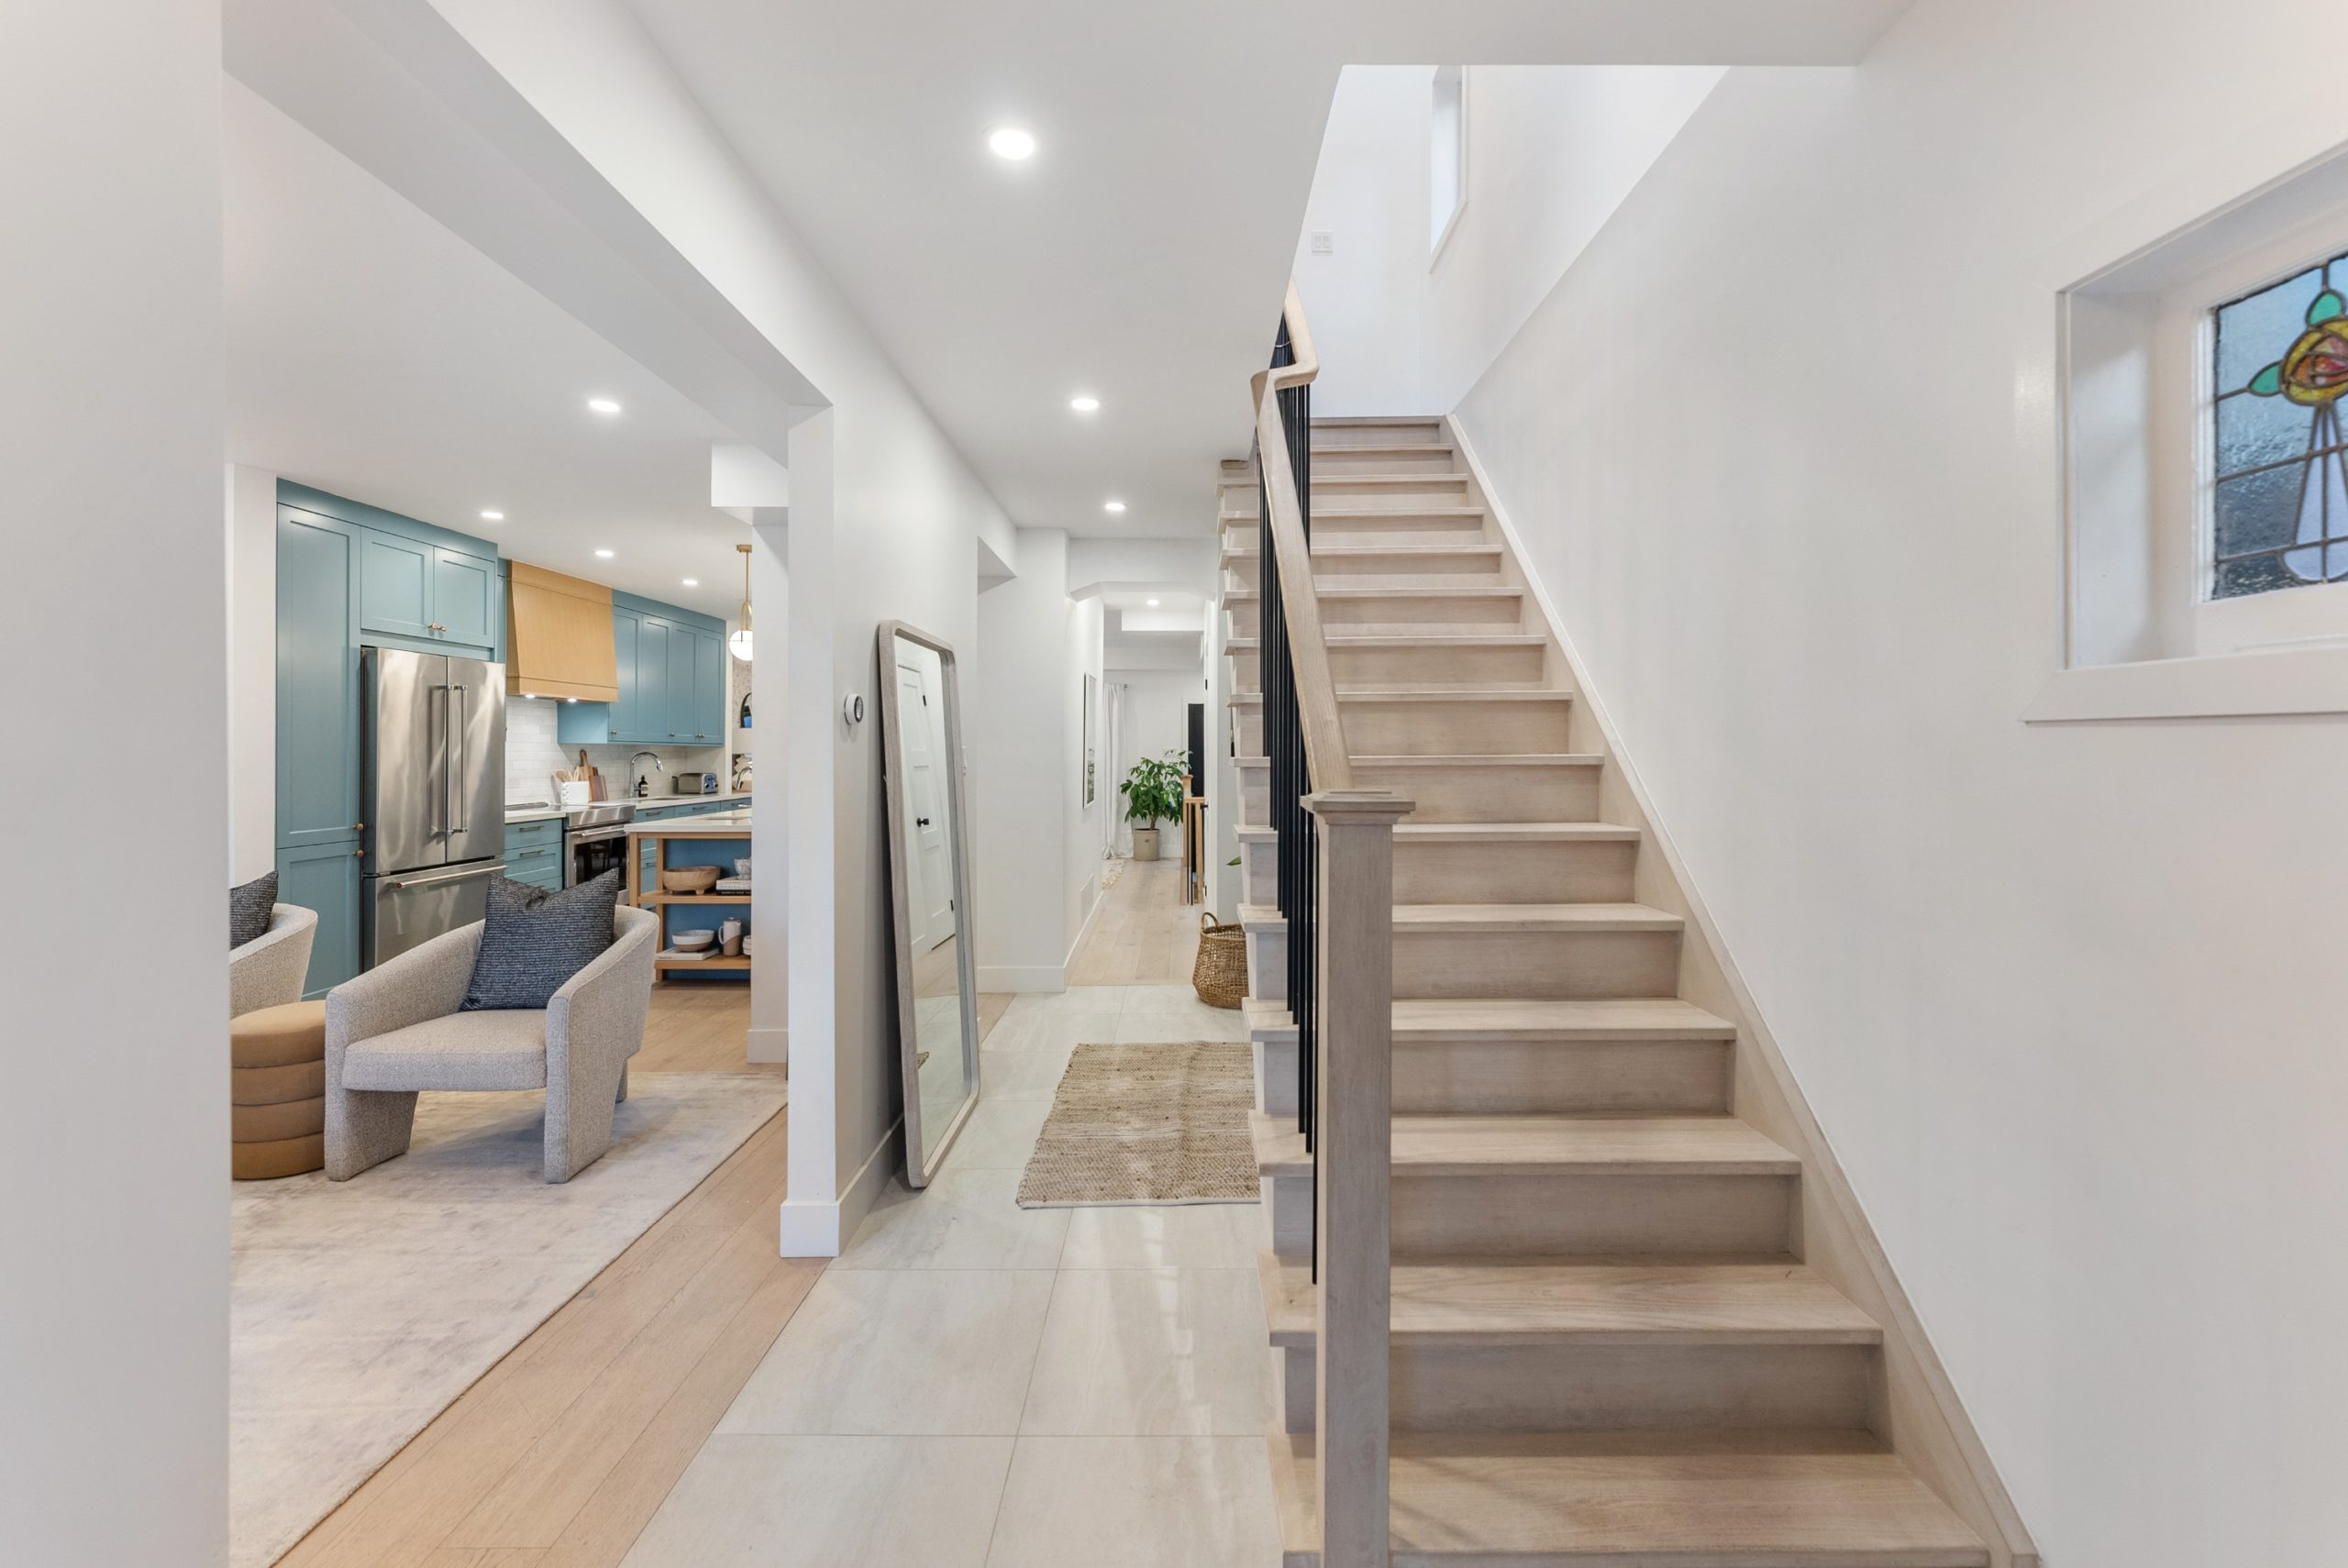 Modern open concept on the left side of the home, traditional alley-style layout on the right. 